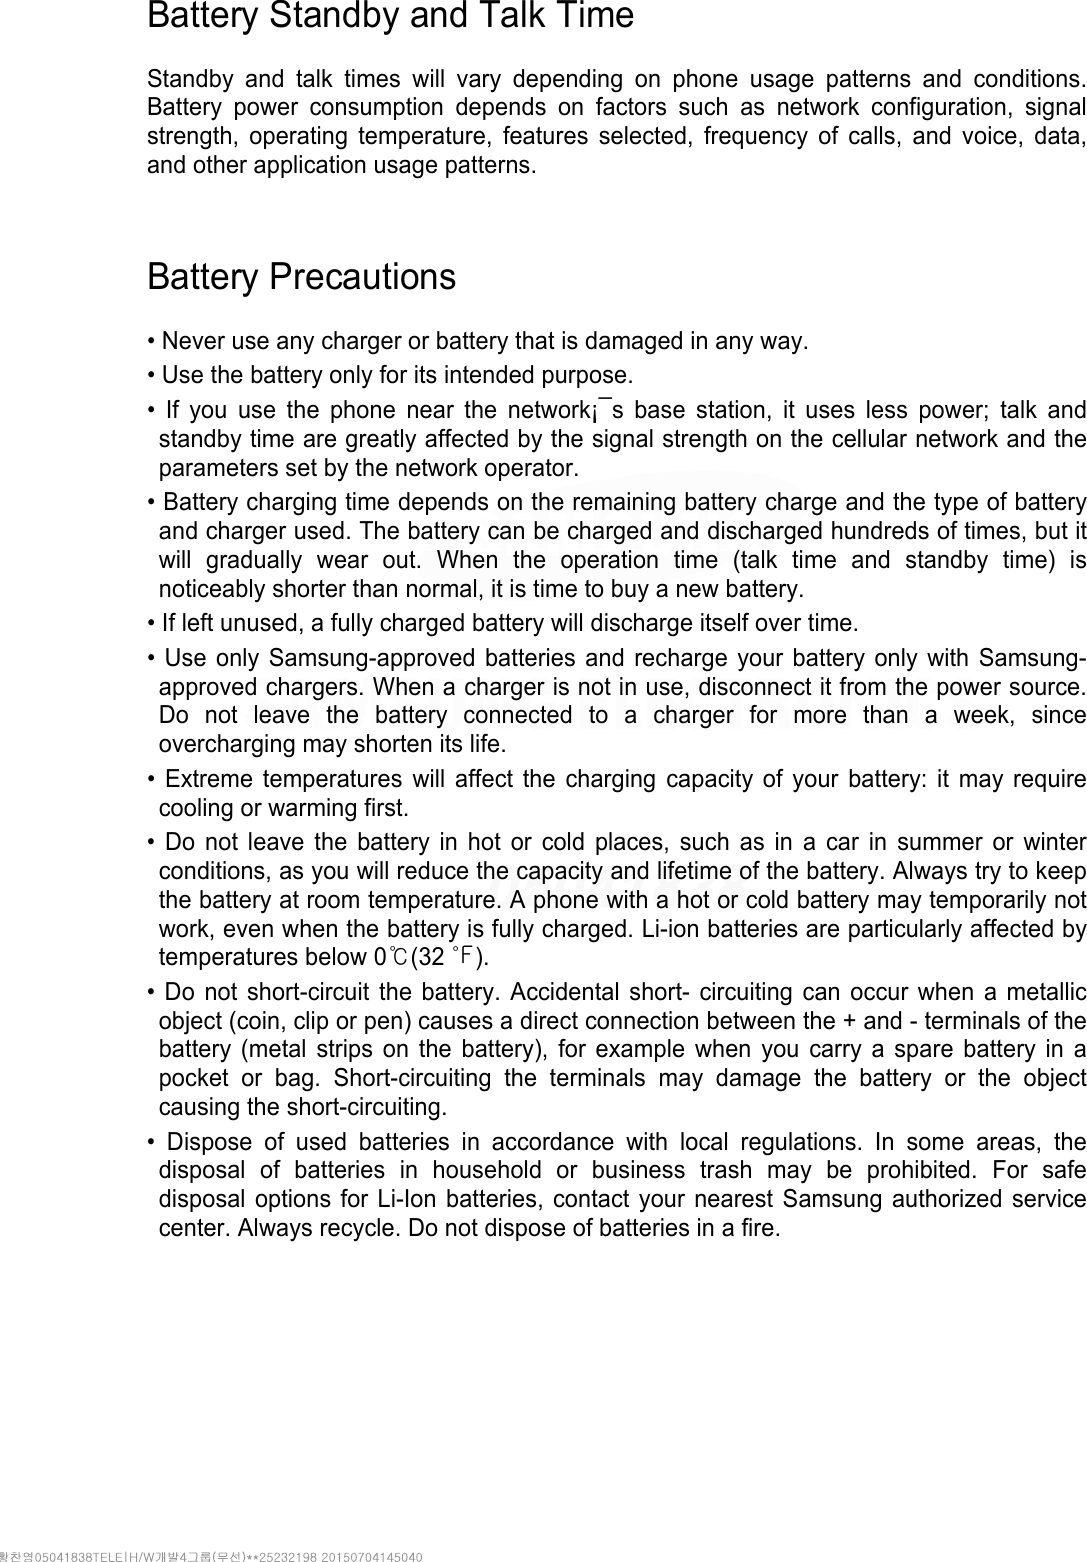 Battery Standby and Talk Time  Standby and talk times will vary depending on phone usage patterns and conditions. Battery power consumption depends on factors such as network configuration, signal strength, operating temperature, features selected, frequency of calls, and voice, data, and other application usage patterns.     Battery Precautions  • Never use any charger or battery that is damaged in any way. • Use the battery only for its intended purpose. • If you use the phone near the network¡¯s base station, it uses less power; talk and standby time are greatly affected by the signal strength on the cellular network and the parameters set by the network operator. • Battery charging time depends on the remaining battery charge and the type of battery and charger used. The battery can be charged and discharged hundreds of times, but it will gradually wear out. When the operation time (talk time and standby time) is noticeably shorter than normal, it is time to buy a new battery. • If left unused, a fully charged battery will discharge itself over time. • Use only Samsung-approved batteries and recharge your battery only with Samsung-approved chargers. When a charger is not in use, disconnect it from the power source. Do not leave the battery connected to a charger for more than a week, since overcharging may shorten its life. • Extreme temperatures will affect the charging capacity of your battery: it may require cooling or warming first. • Do not leave the battery in hot or cold places, such as in a car in summer or winter conditions, as you will reduce the capacity and lifetime of the battery. Always try to keep the battery at room temperature. A phone with a hot or cold battery may temporarily not work, even when the battery is fully charged. Li-ion batteries are particularly affected by temperatures below 0℃(32 ℉). • Do not short-circuit the battery. Accidental short- circuiting can occur when a metallic object (coin, clip or pen) causes a direct connection between the + and - terminals of the battery (metal strips on the battery), for example when you carry a spare battery in a pocket or bag. Short-circuiting the terminals may damage the battery or the object causing the short-circuiting. • Dispose of used batteries in accordance with local regulations. In some areas, the disposal of batteries in household or business trash may be prohibited. For safe disposal options for Li-Ion batteries, contact your nearest Samsung authorized service center. Always recycle. Do not dispose of batteries in a fire.     